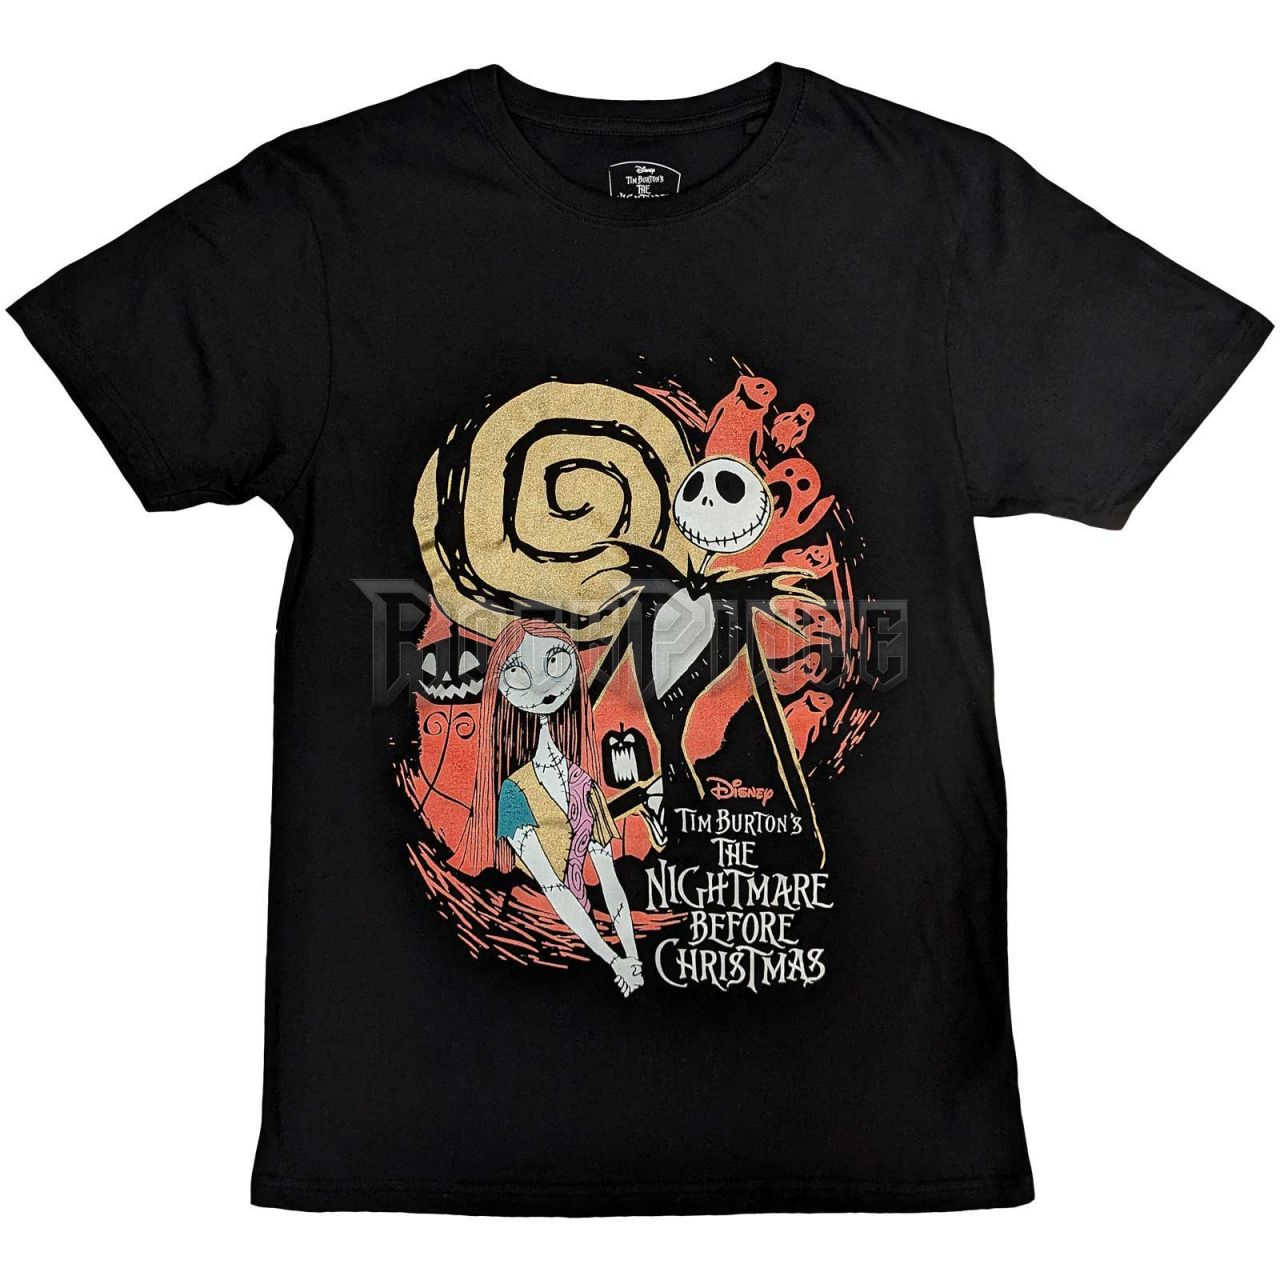 Disney: The Nightmare Before Christmas Ghosts - unisex póló - TNBCTS45MB